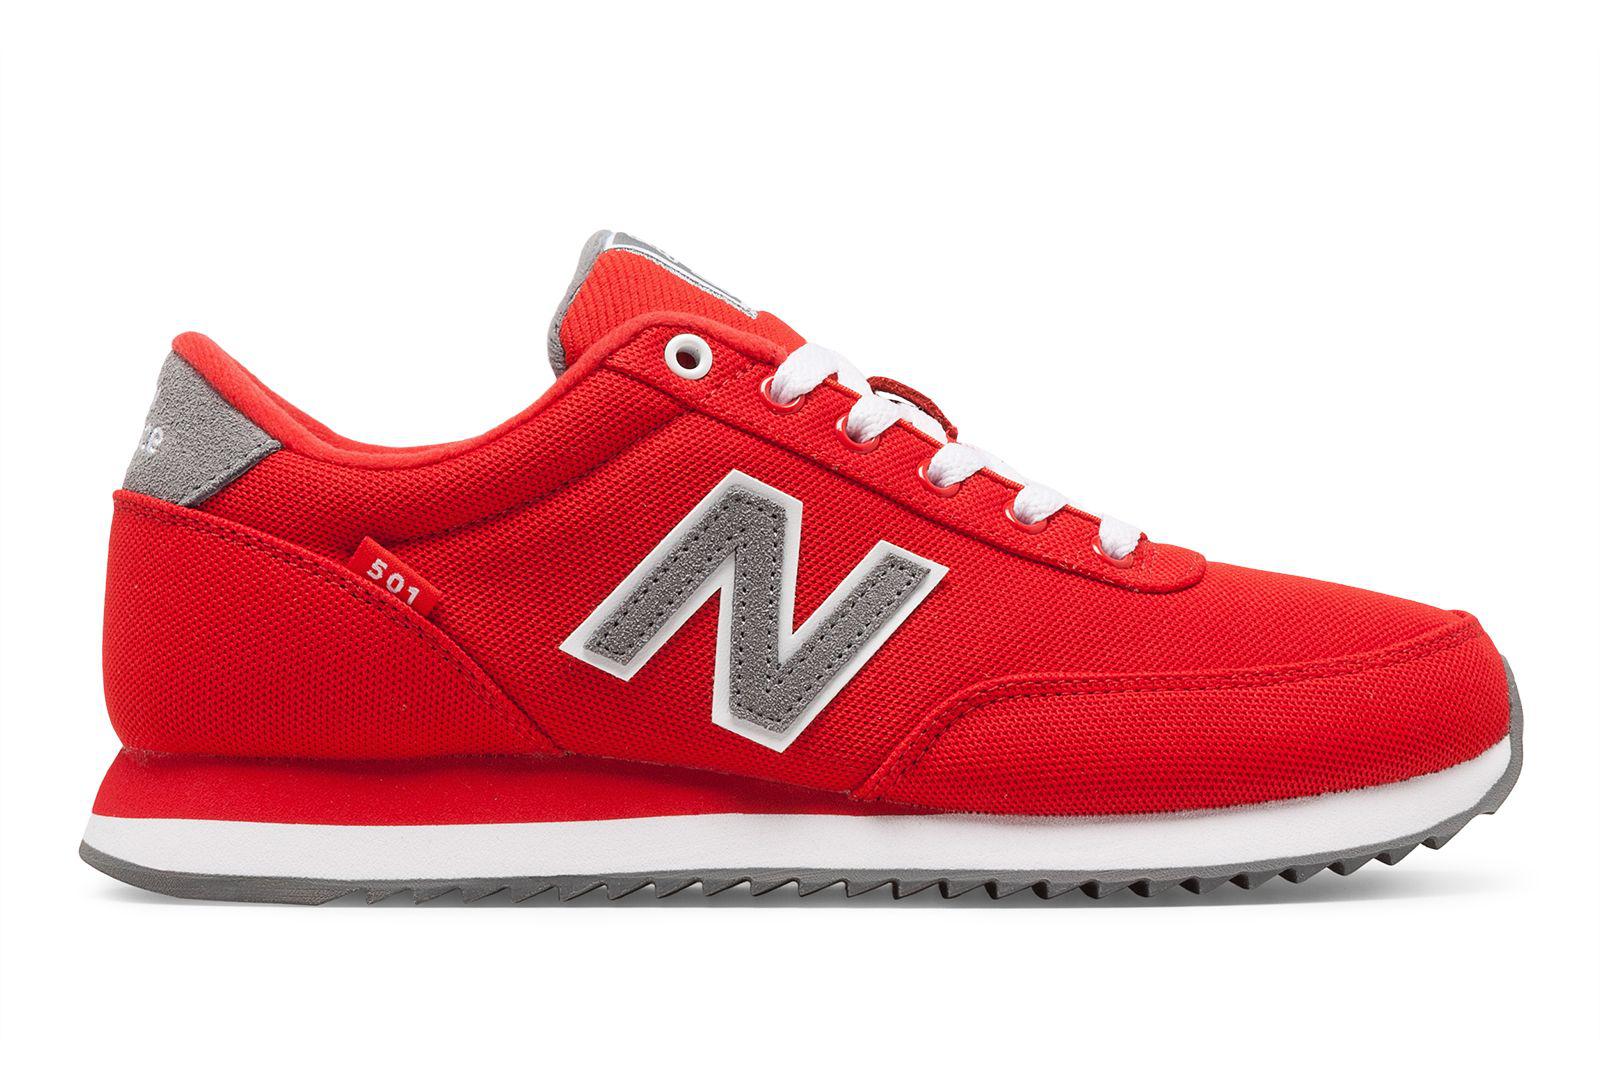 New Balance Rubber 501 Ripple Sole in Red - Lyst